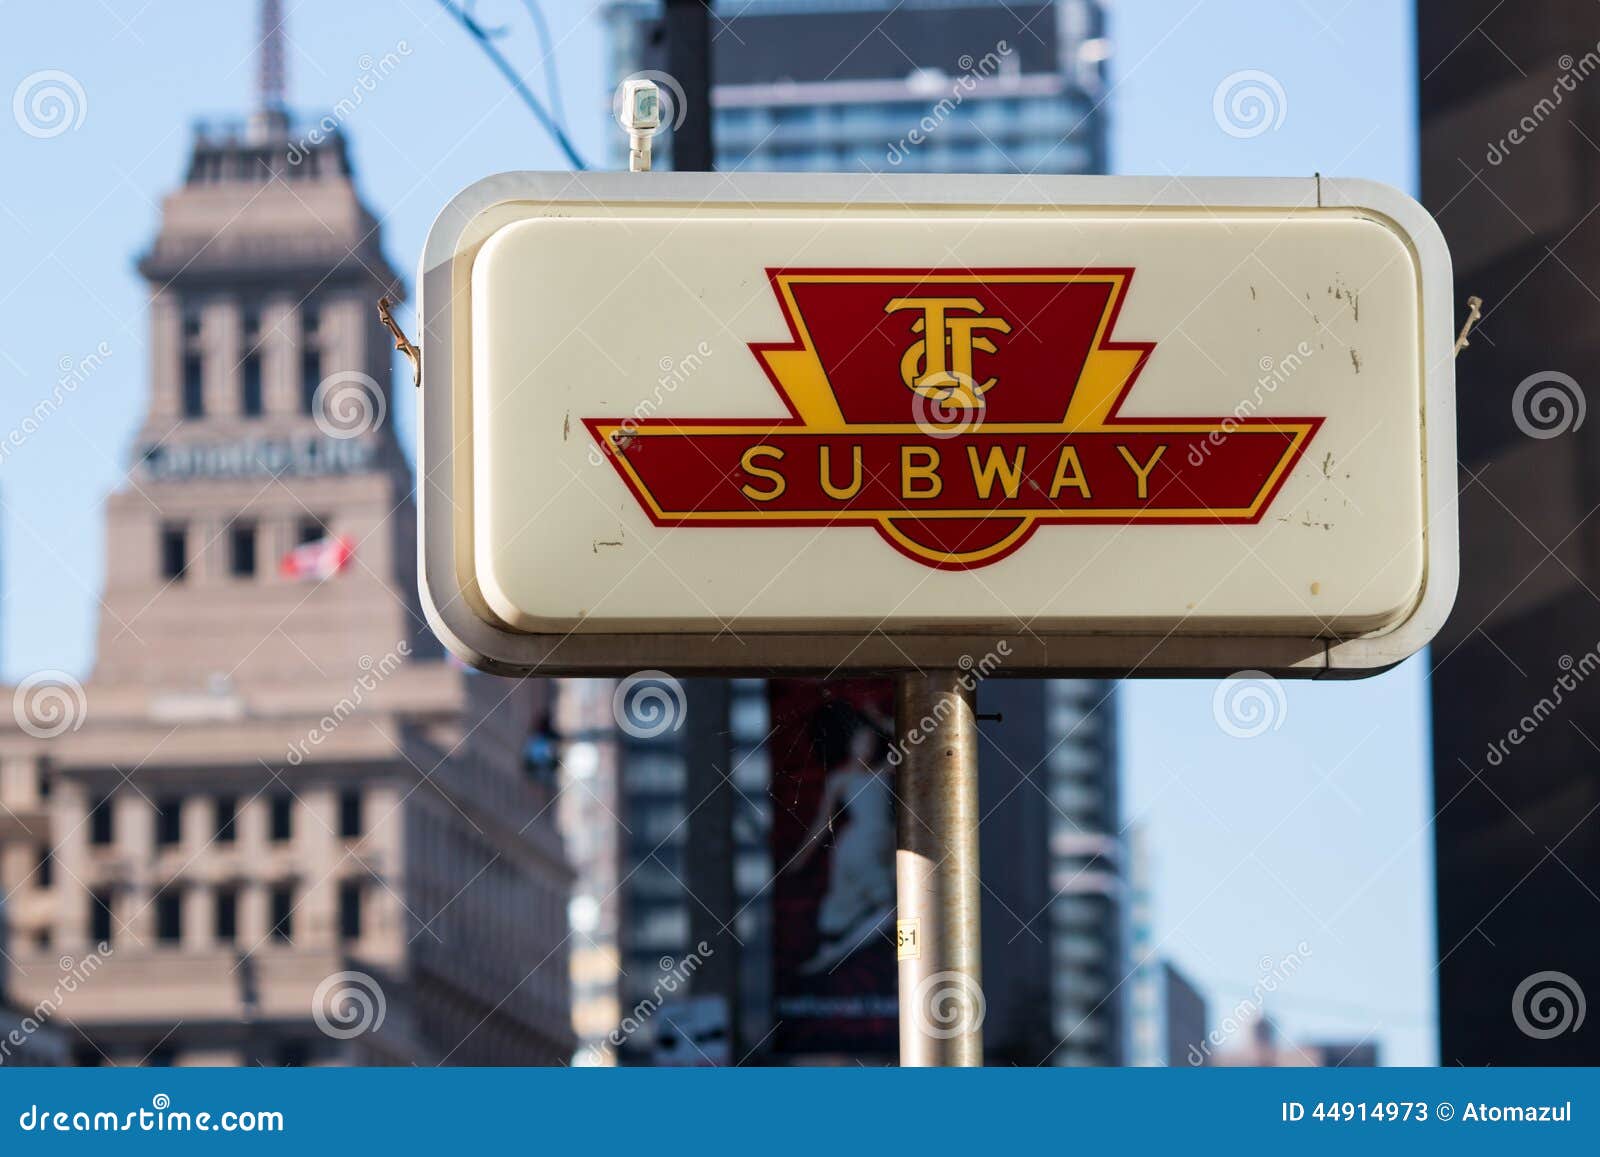 ttc-subway-sign-toronto-indicating-entrance-to-located-king-street-downtown-ontario-canada-44914973.jpg